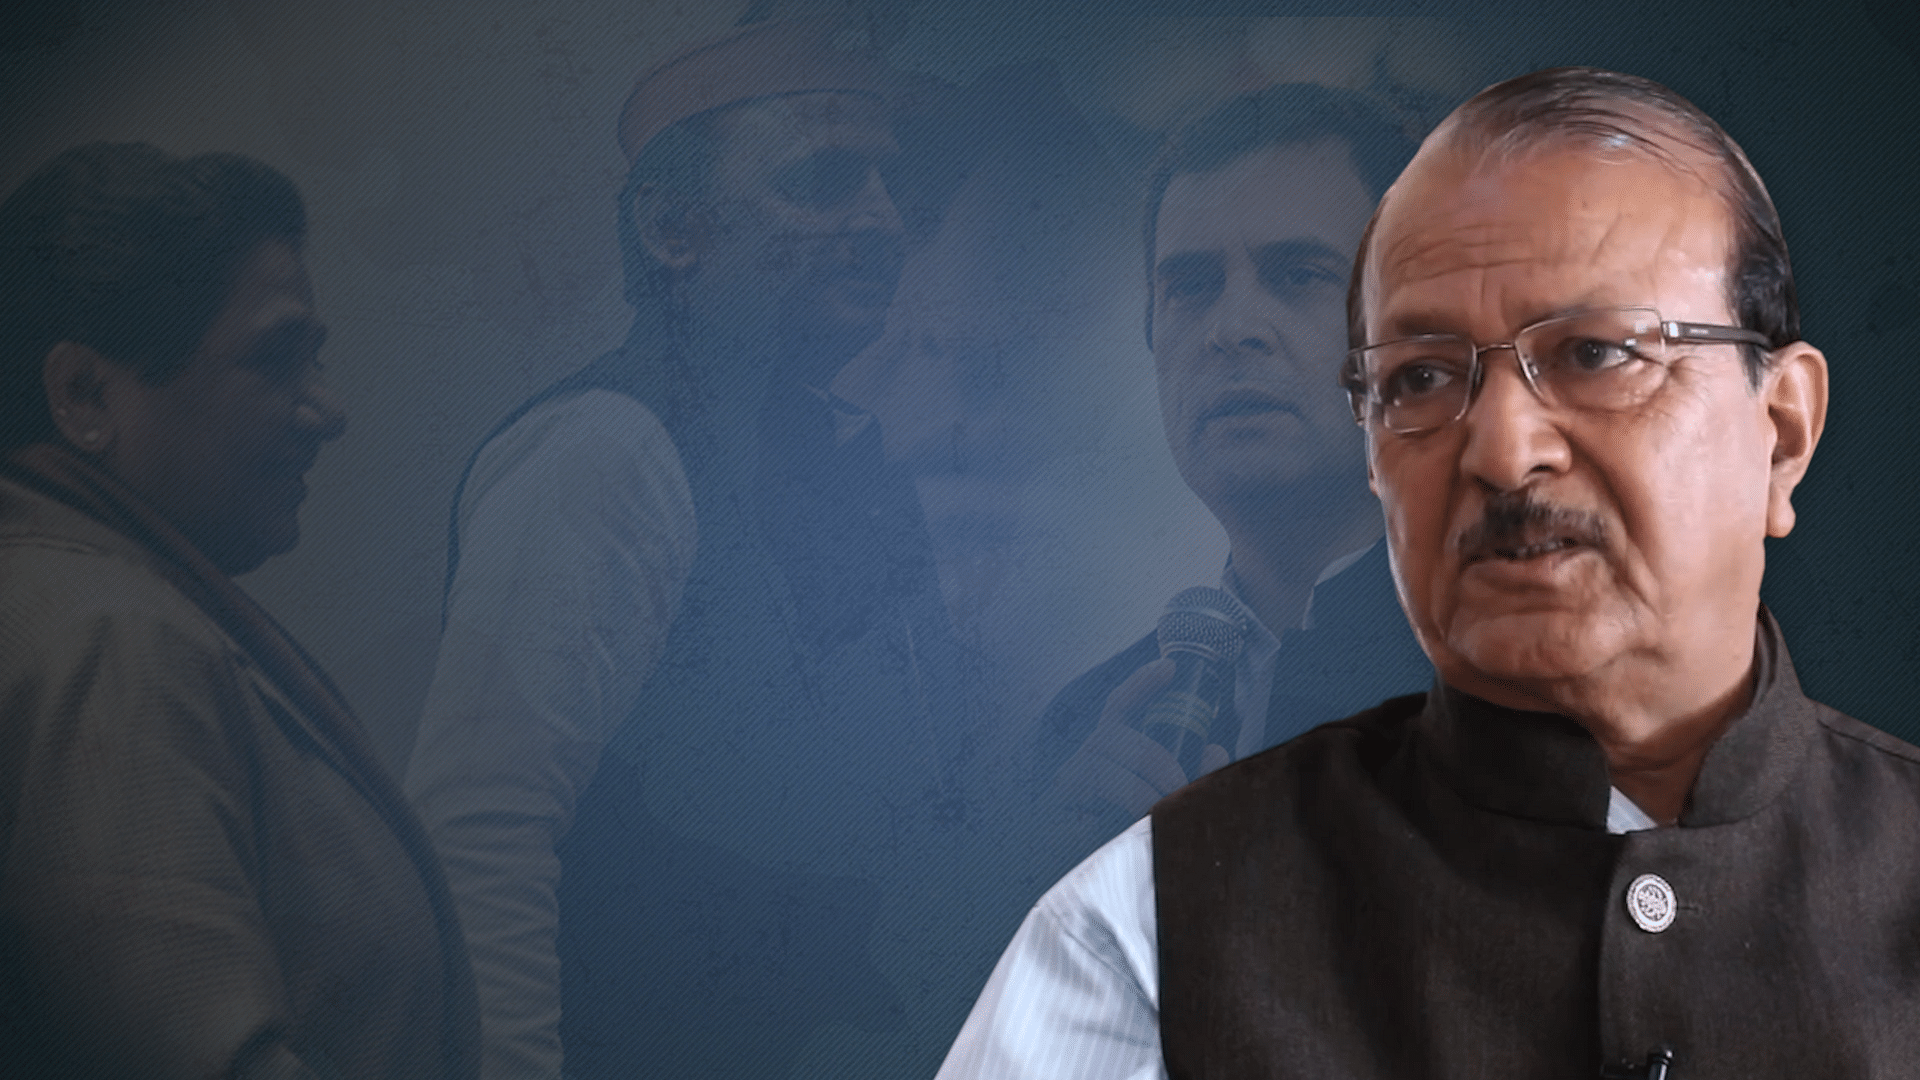 BSP Leader Sudhindra Bhadoria speaks to <b>The Quint</b> about recent SP-BSP alliance.